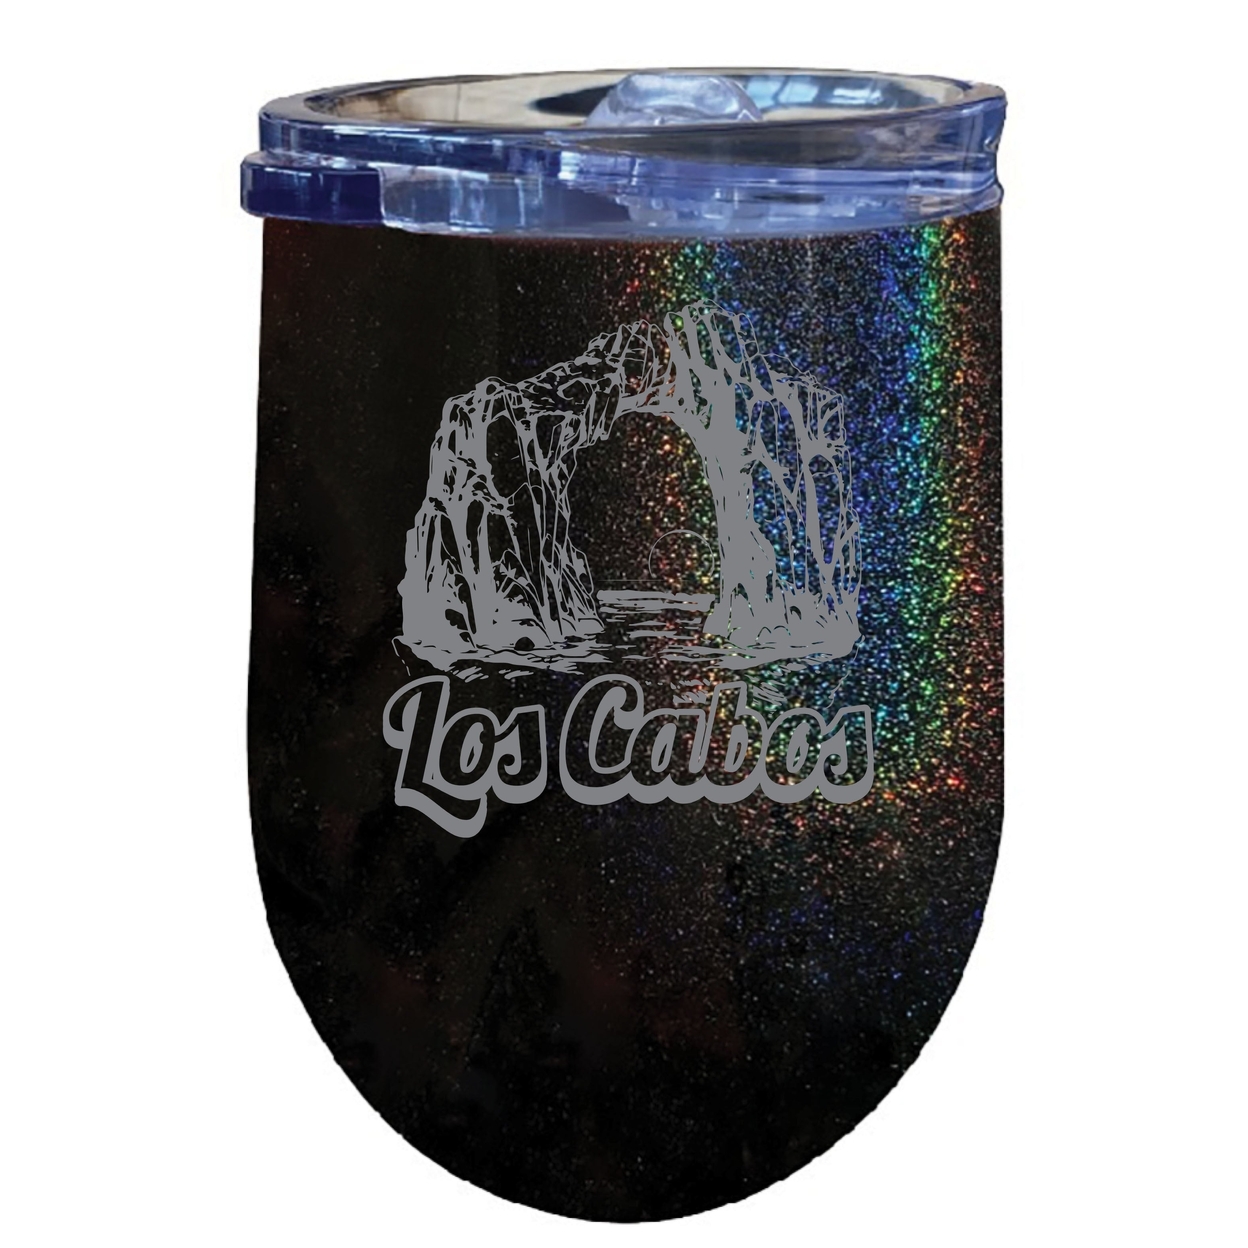 Los Cabos Mexico Souvenir 12 Oz Engraved Insulated Wine Stainless Steel Tumbler - Black,,2-Pack